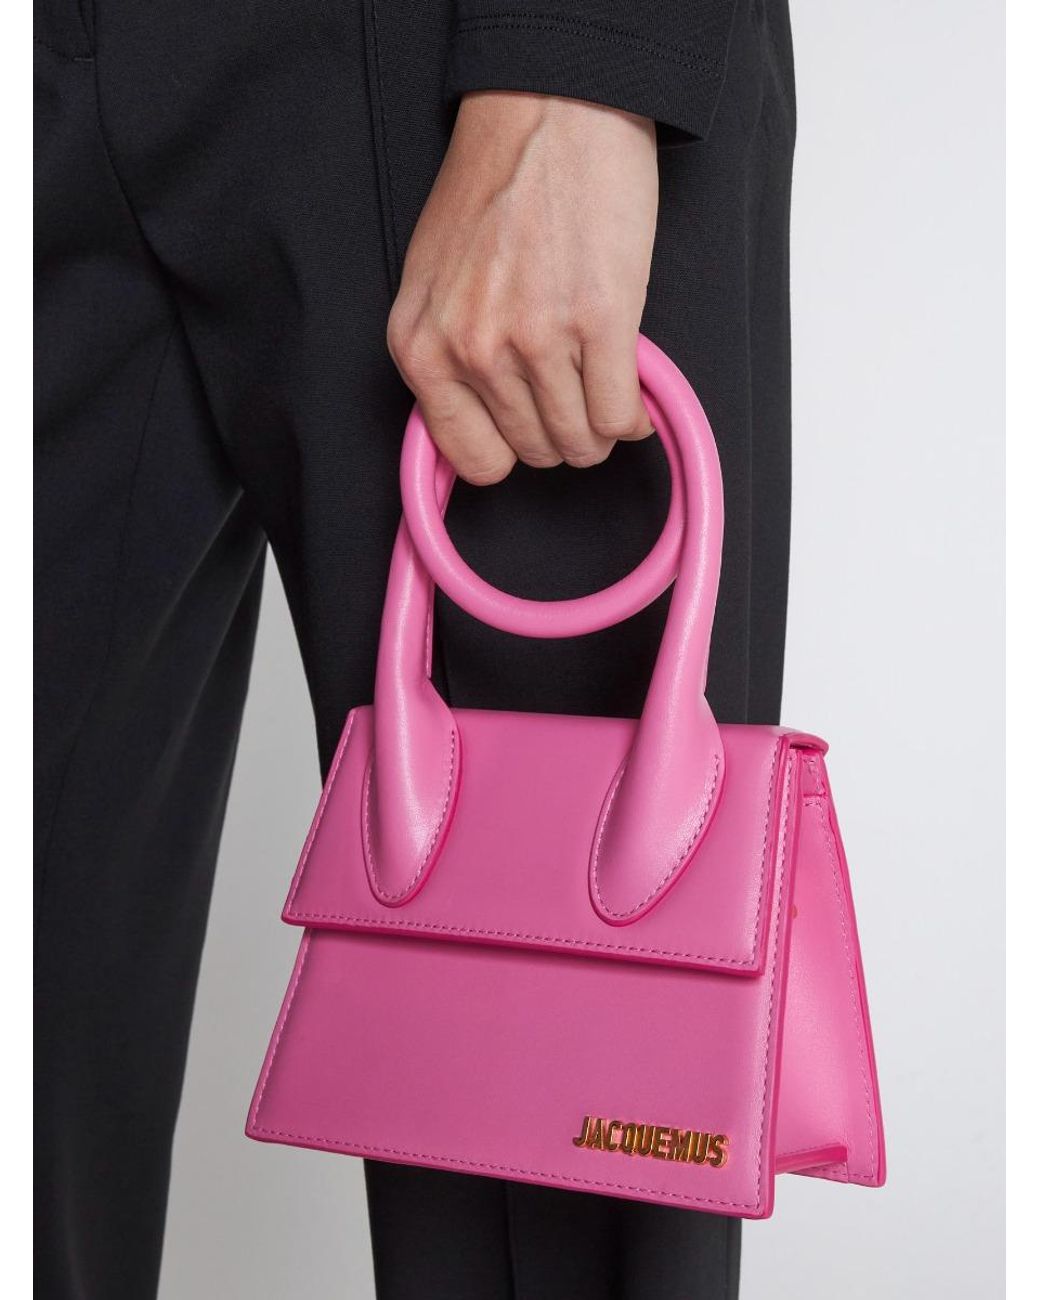 Jacquemus Le Chiquito Noeud Leather Bag in Pink | Lyst